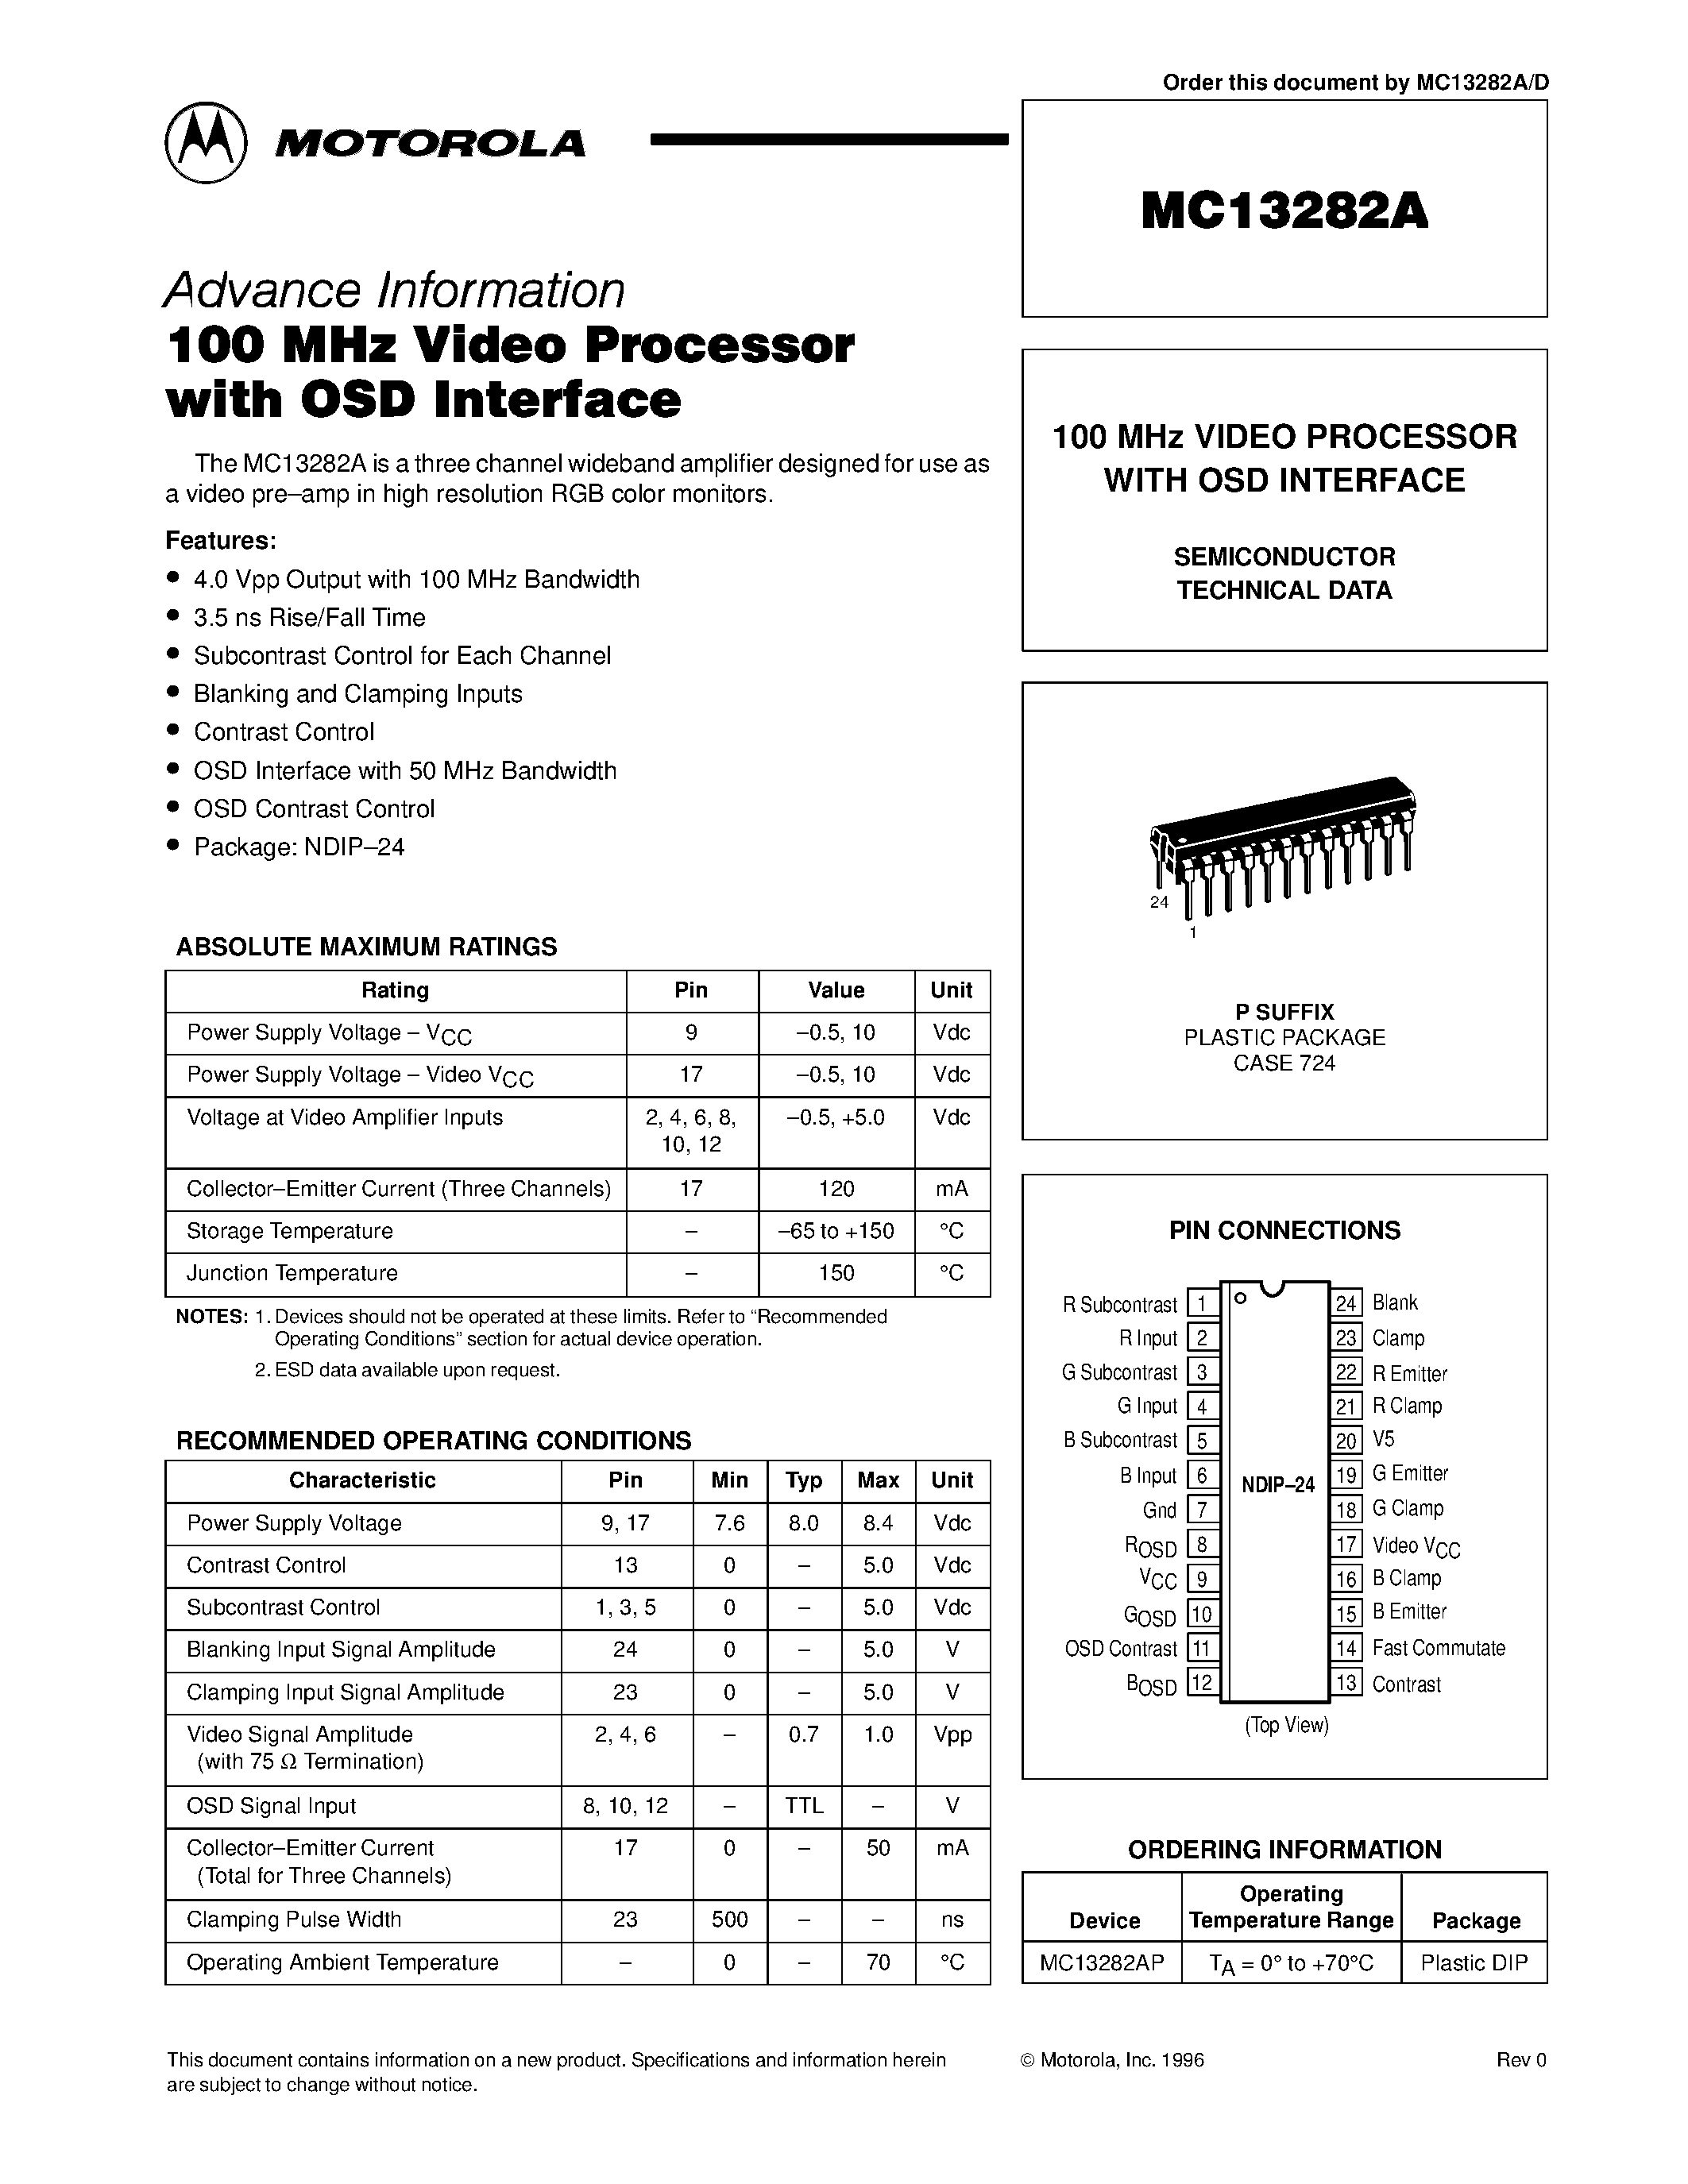 Datasheet MC13282AP - 130 MHz VIDEO PROCESSOR WITH OSD INTERFACE page 1